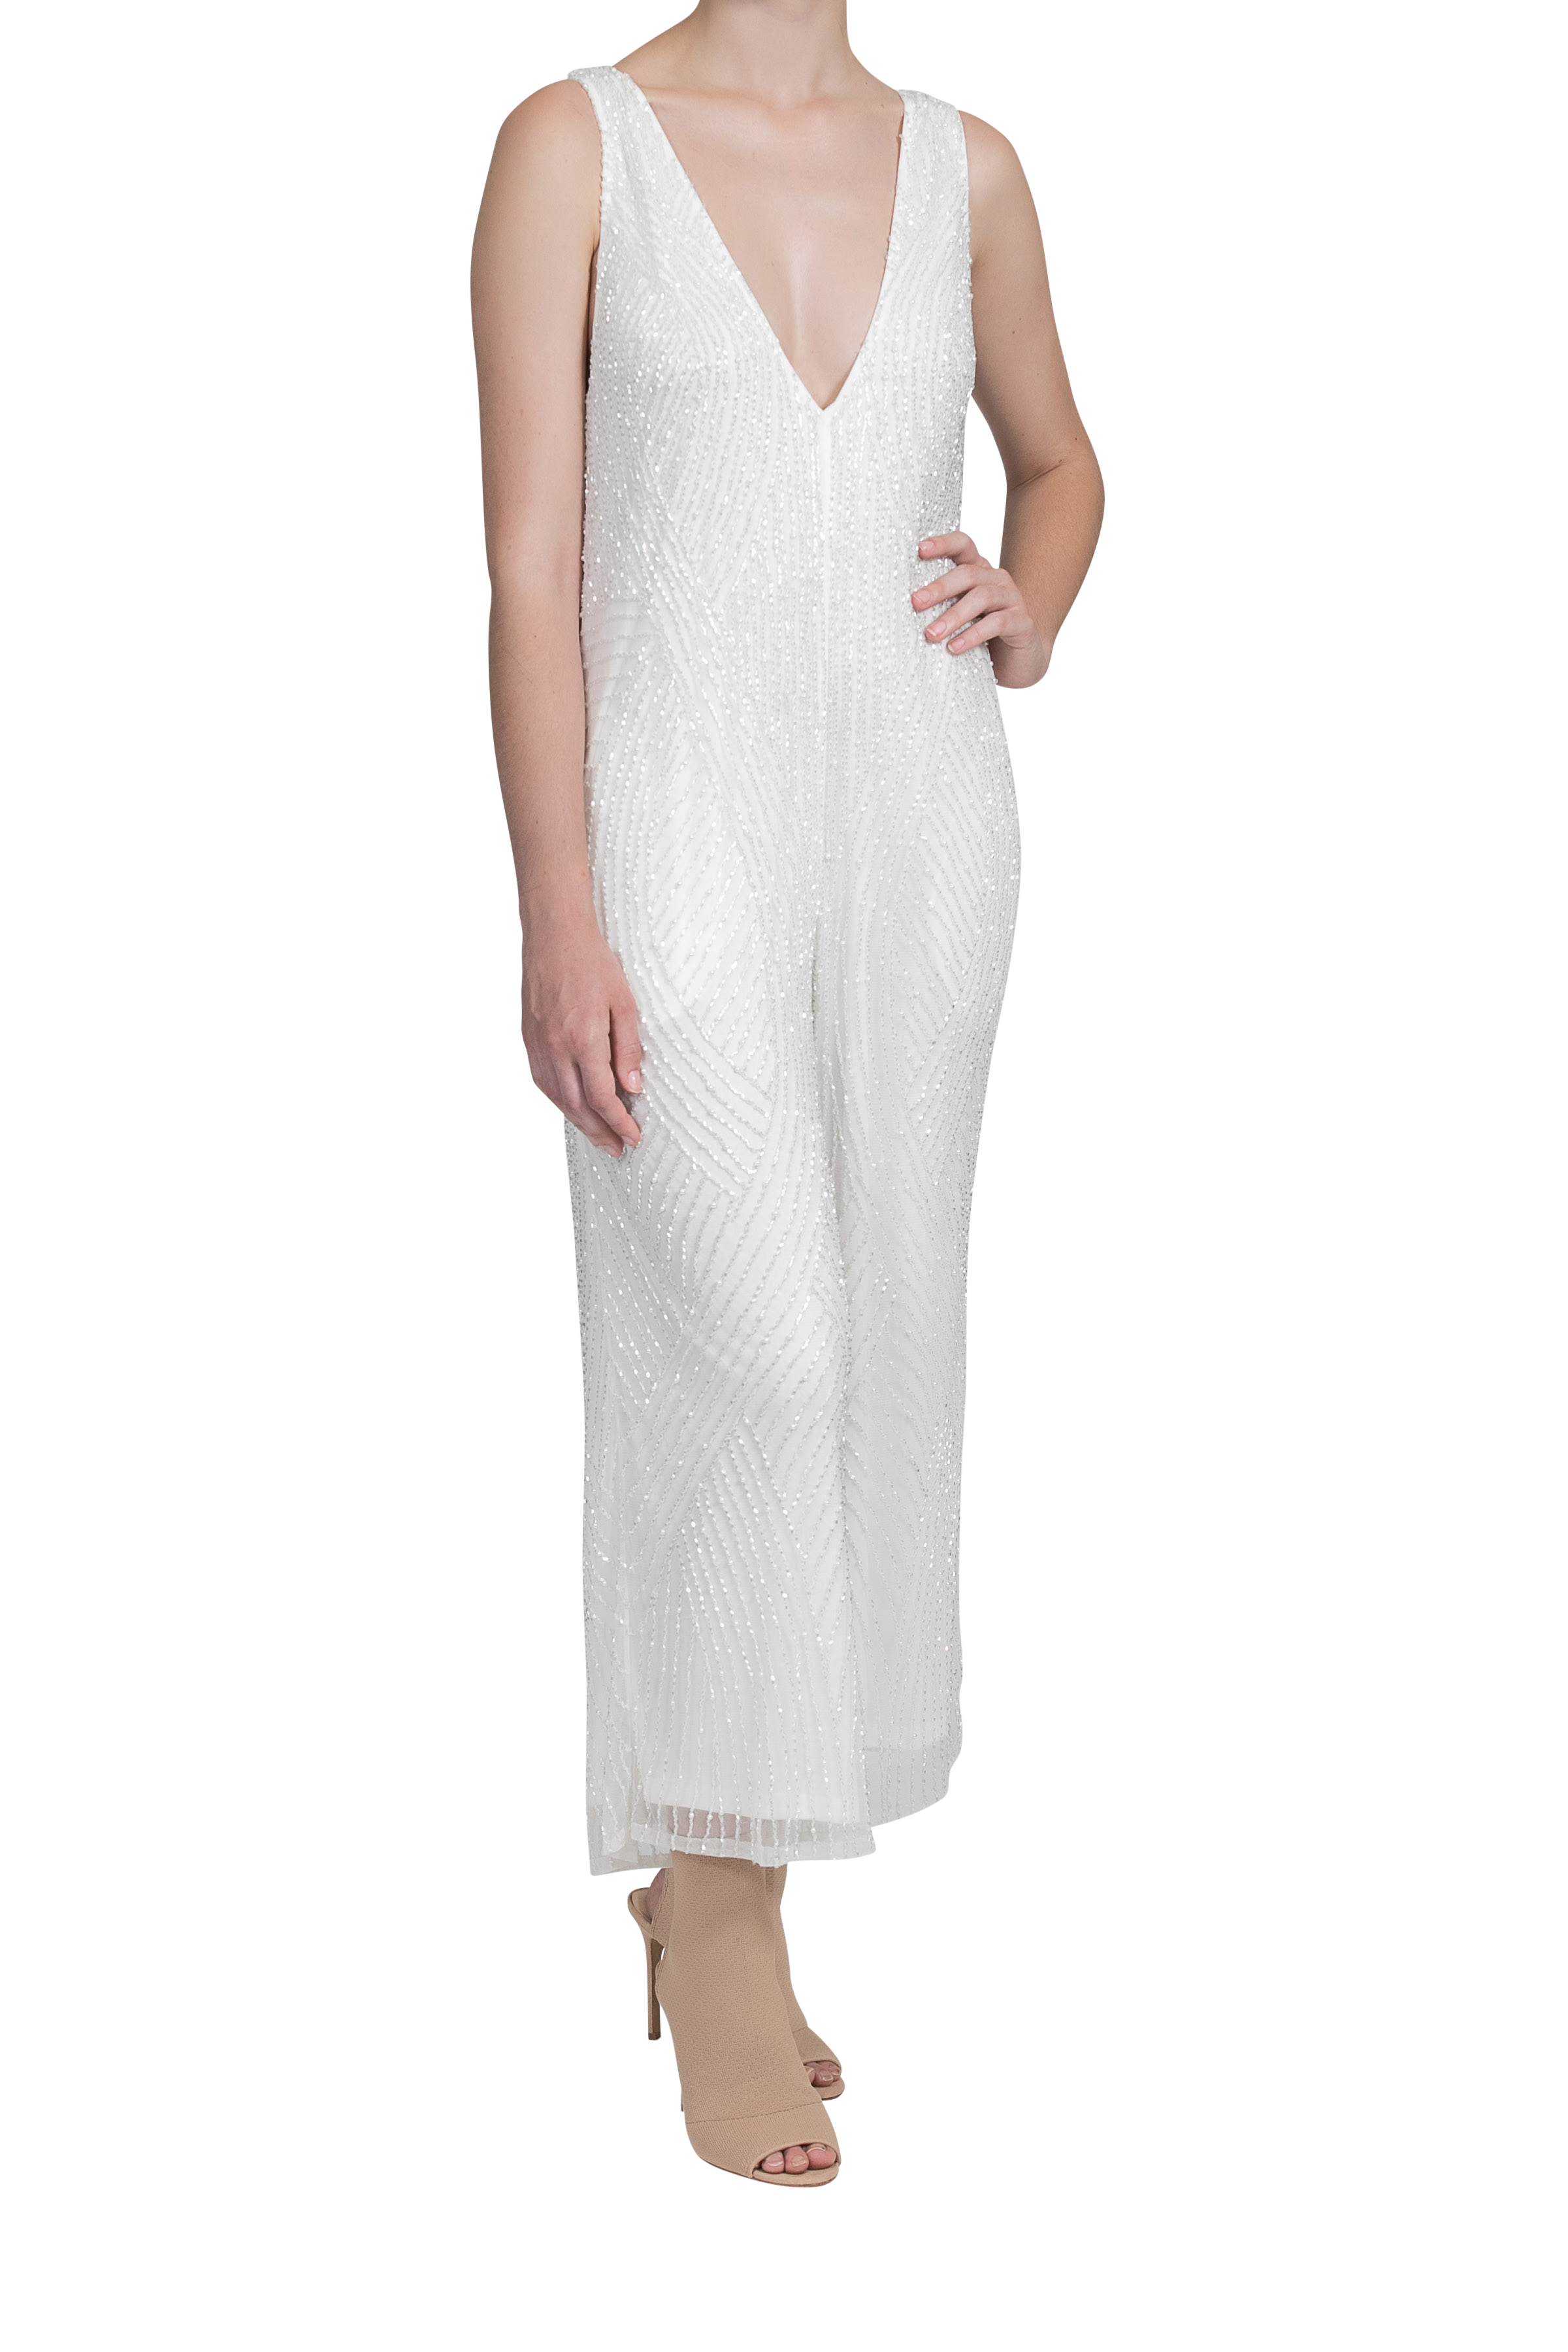 Amplify Jumpsuit - Pearl White